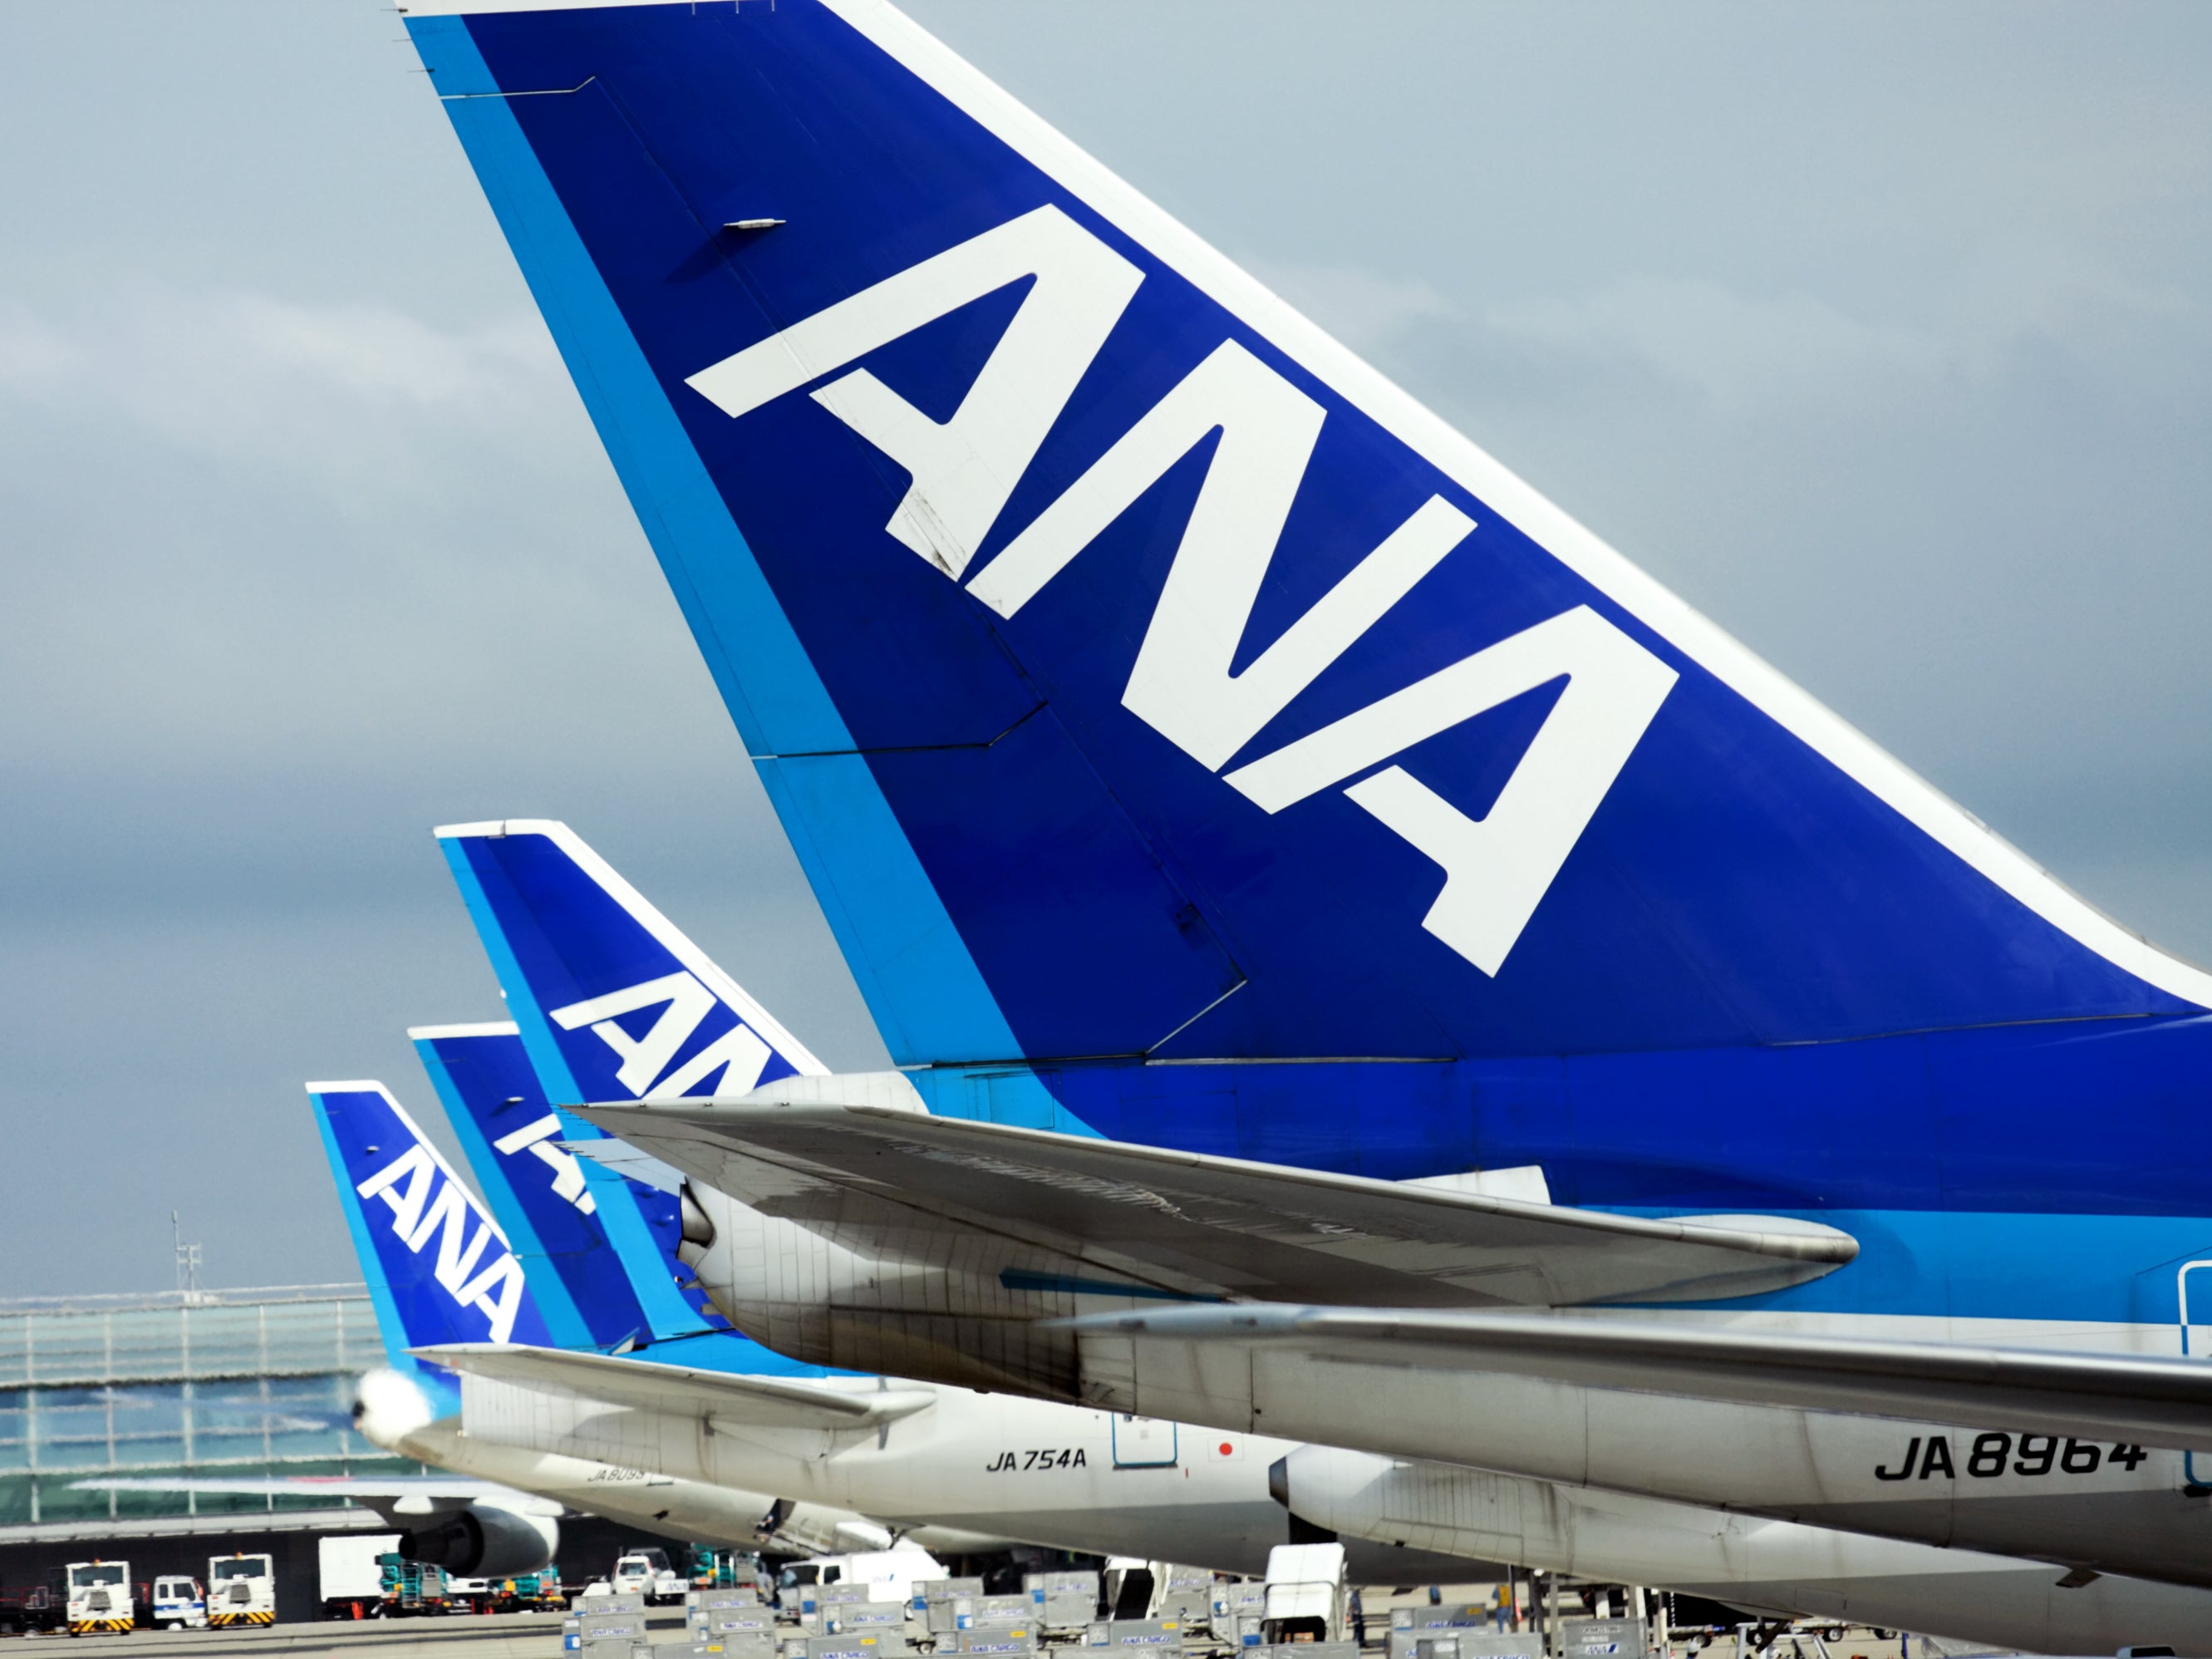 The All Nippon Airways (ANA) flight was forced to return to Haneda Airport in Tokyo in the early hours of Wednesday morning